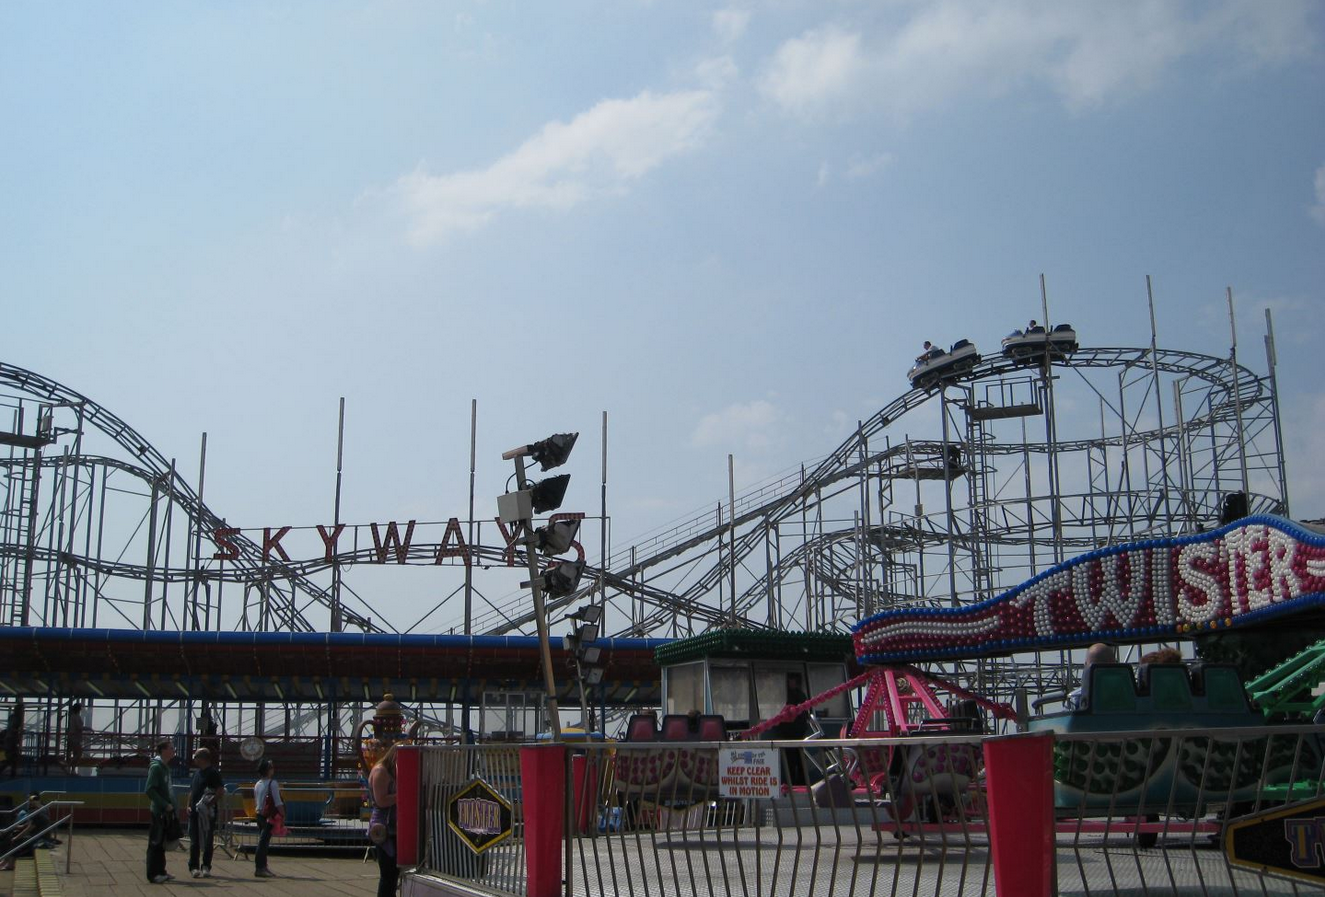 The Skyways rollercoaster pictured behind the Twister flat ride